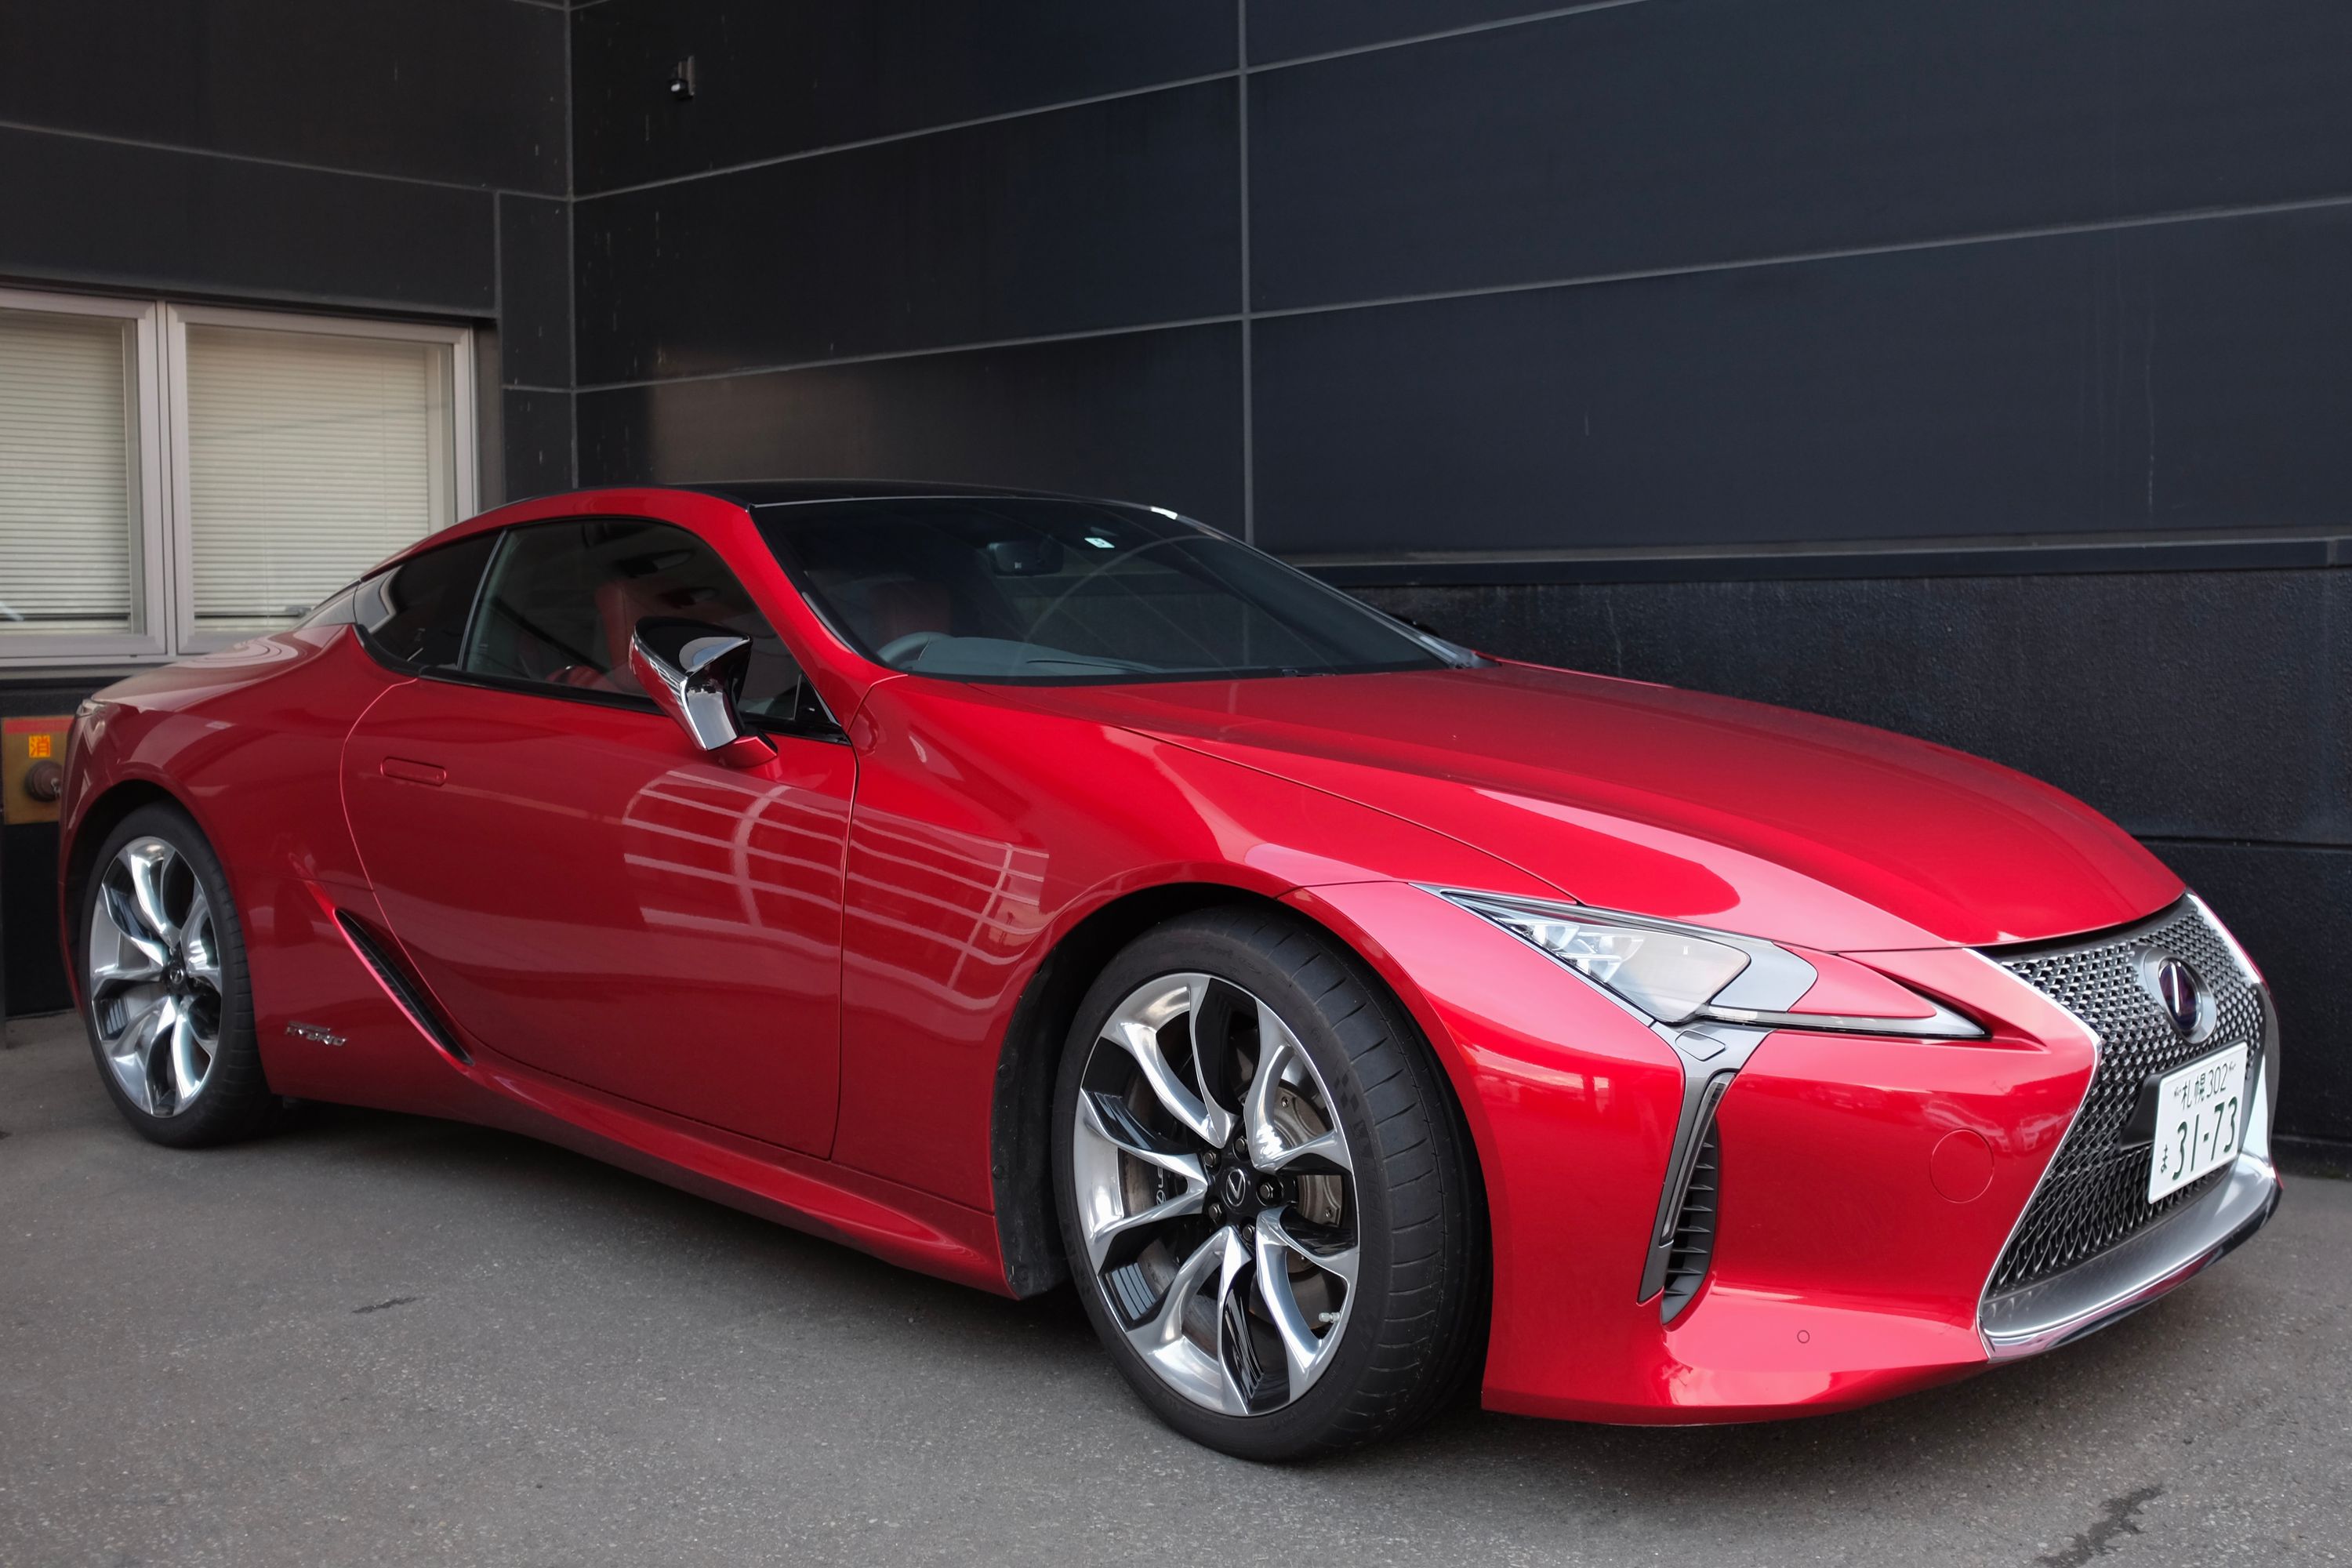 A red Lexus LC500H sports car parked by a dark grey wall.